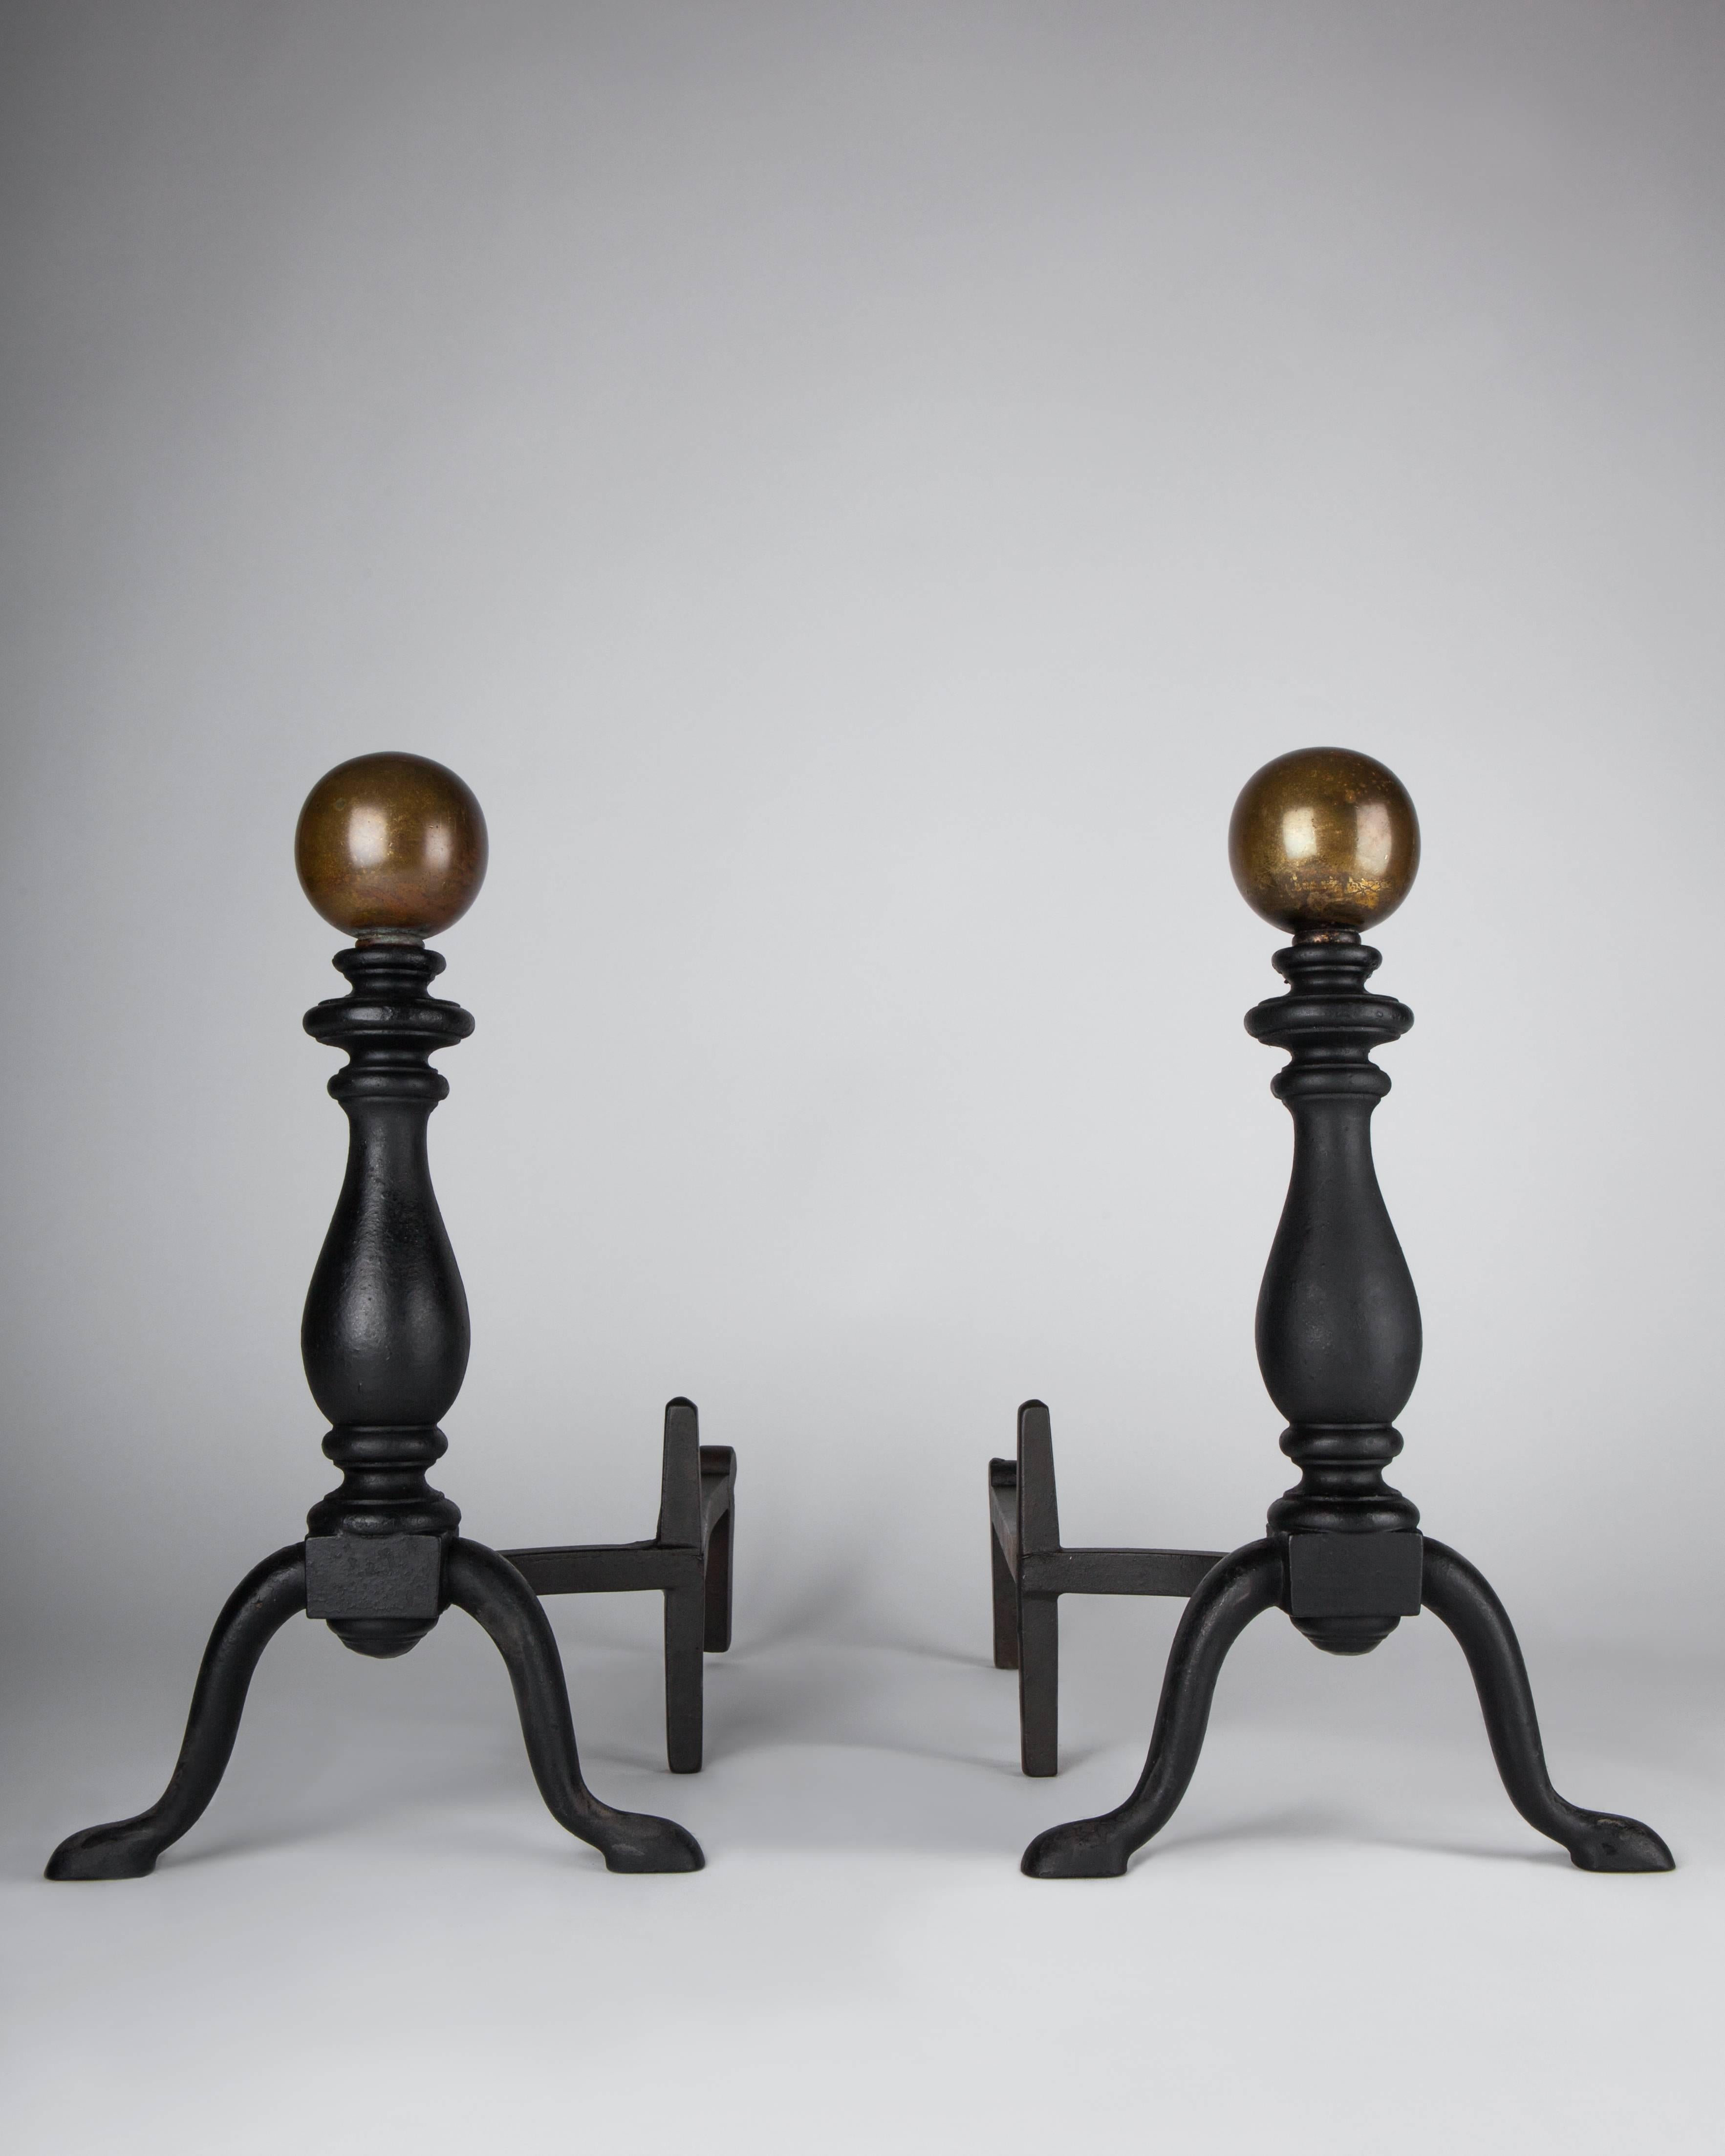 AFP0523,
A pair of antique blackened iron andirons with simple brass ball finials in their original aged patina.

Dimensions:
Overall: 17-1/2